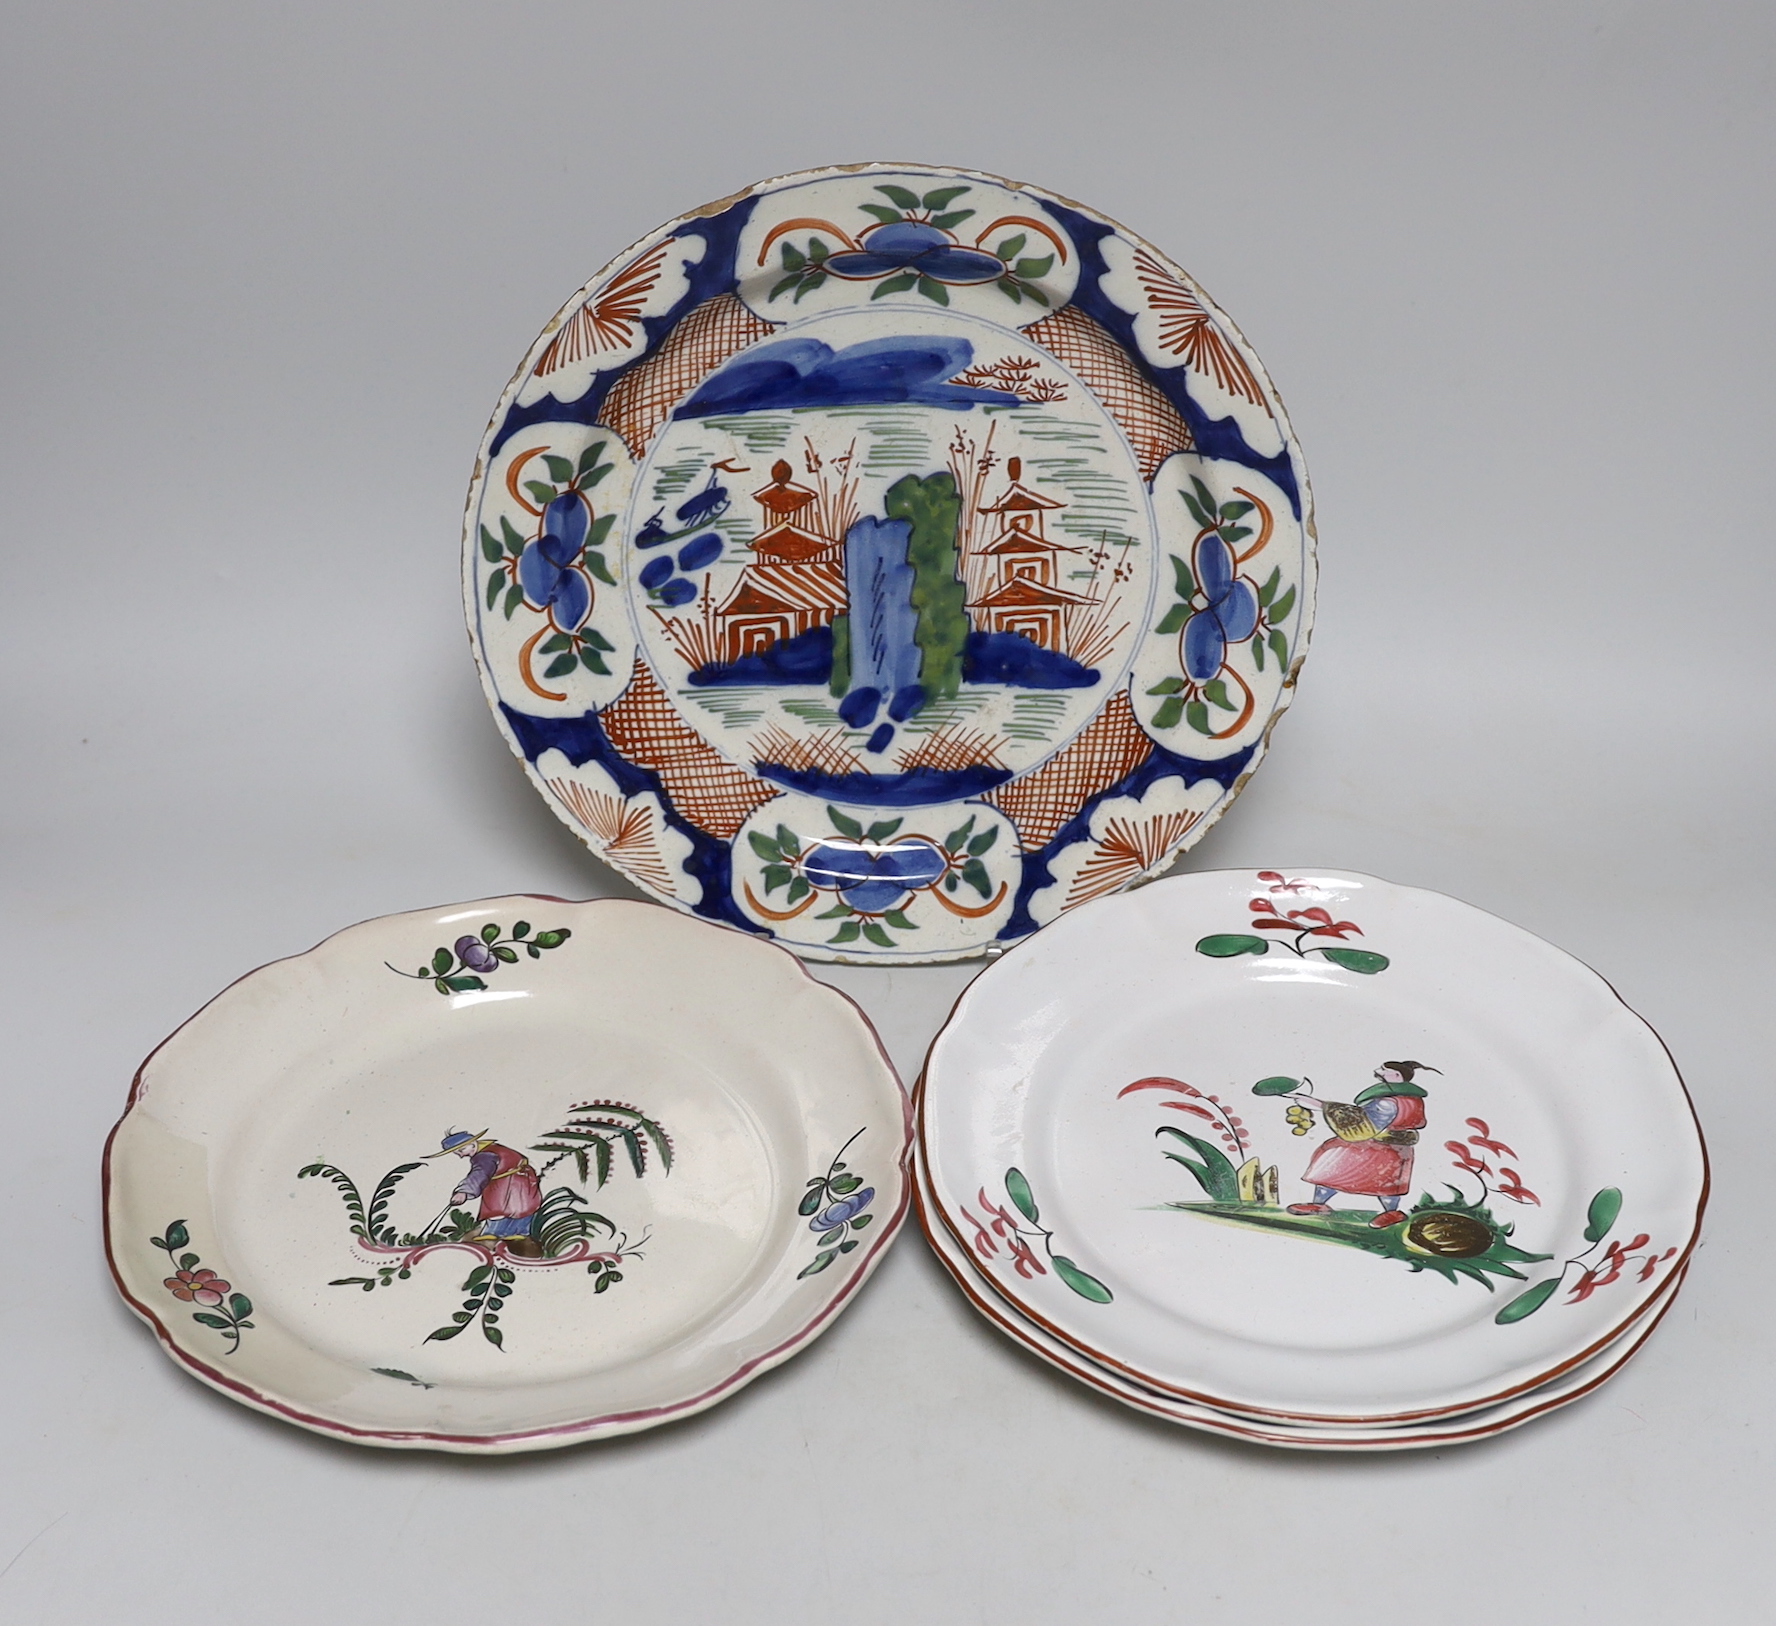 An 18th century Delft plate and three 19th century faience plates, largest 26cm diameter (4)